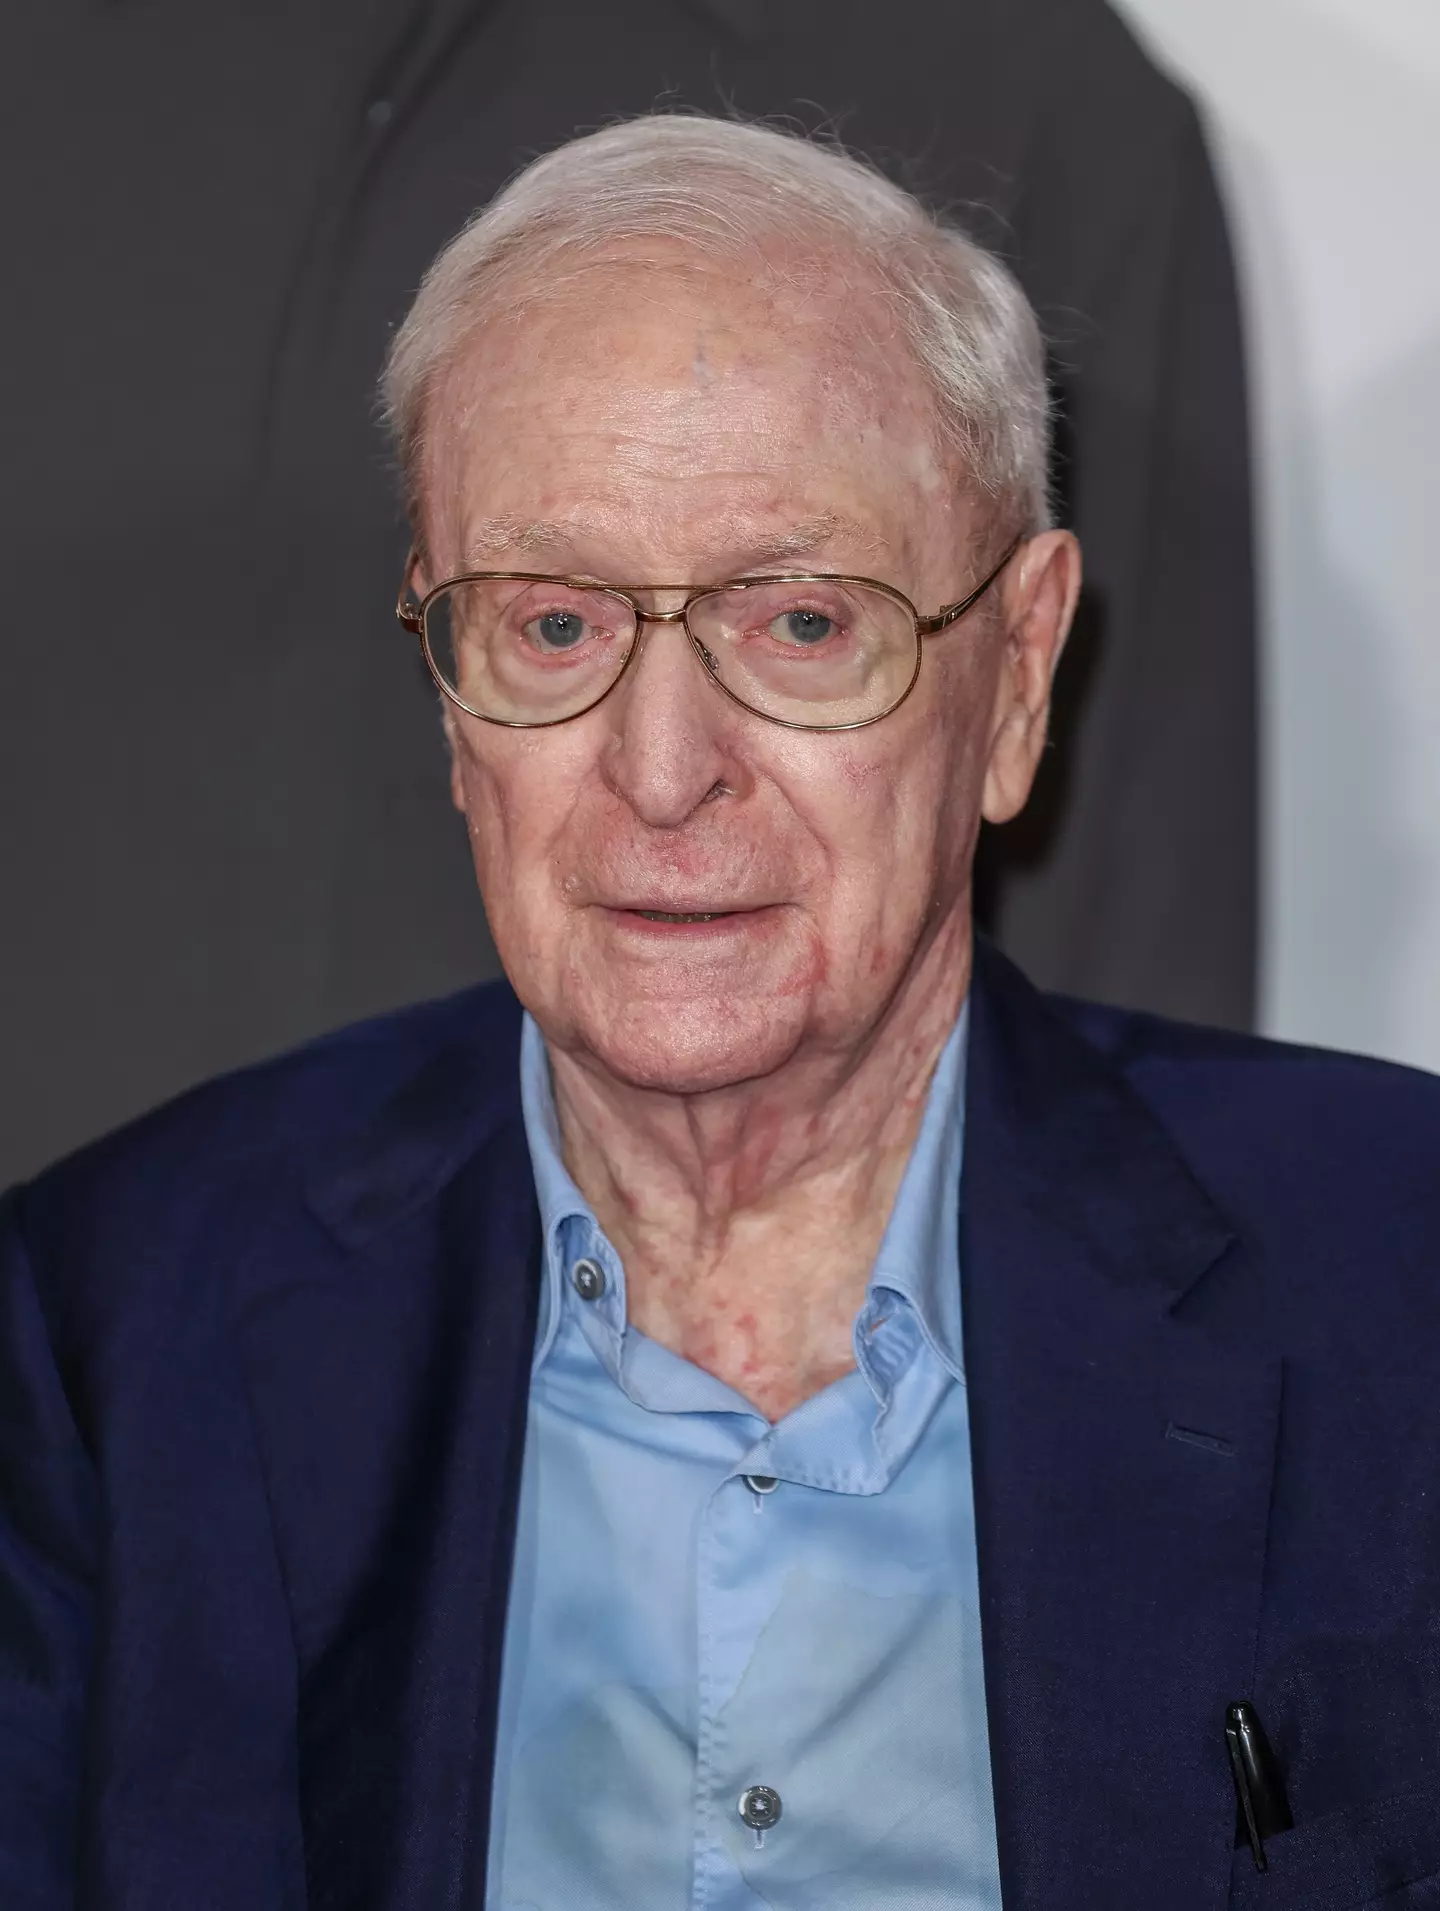 Michael Caine has starred in more than 160 films.